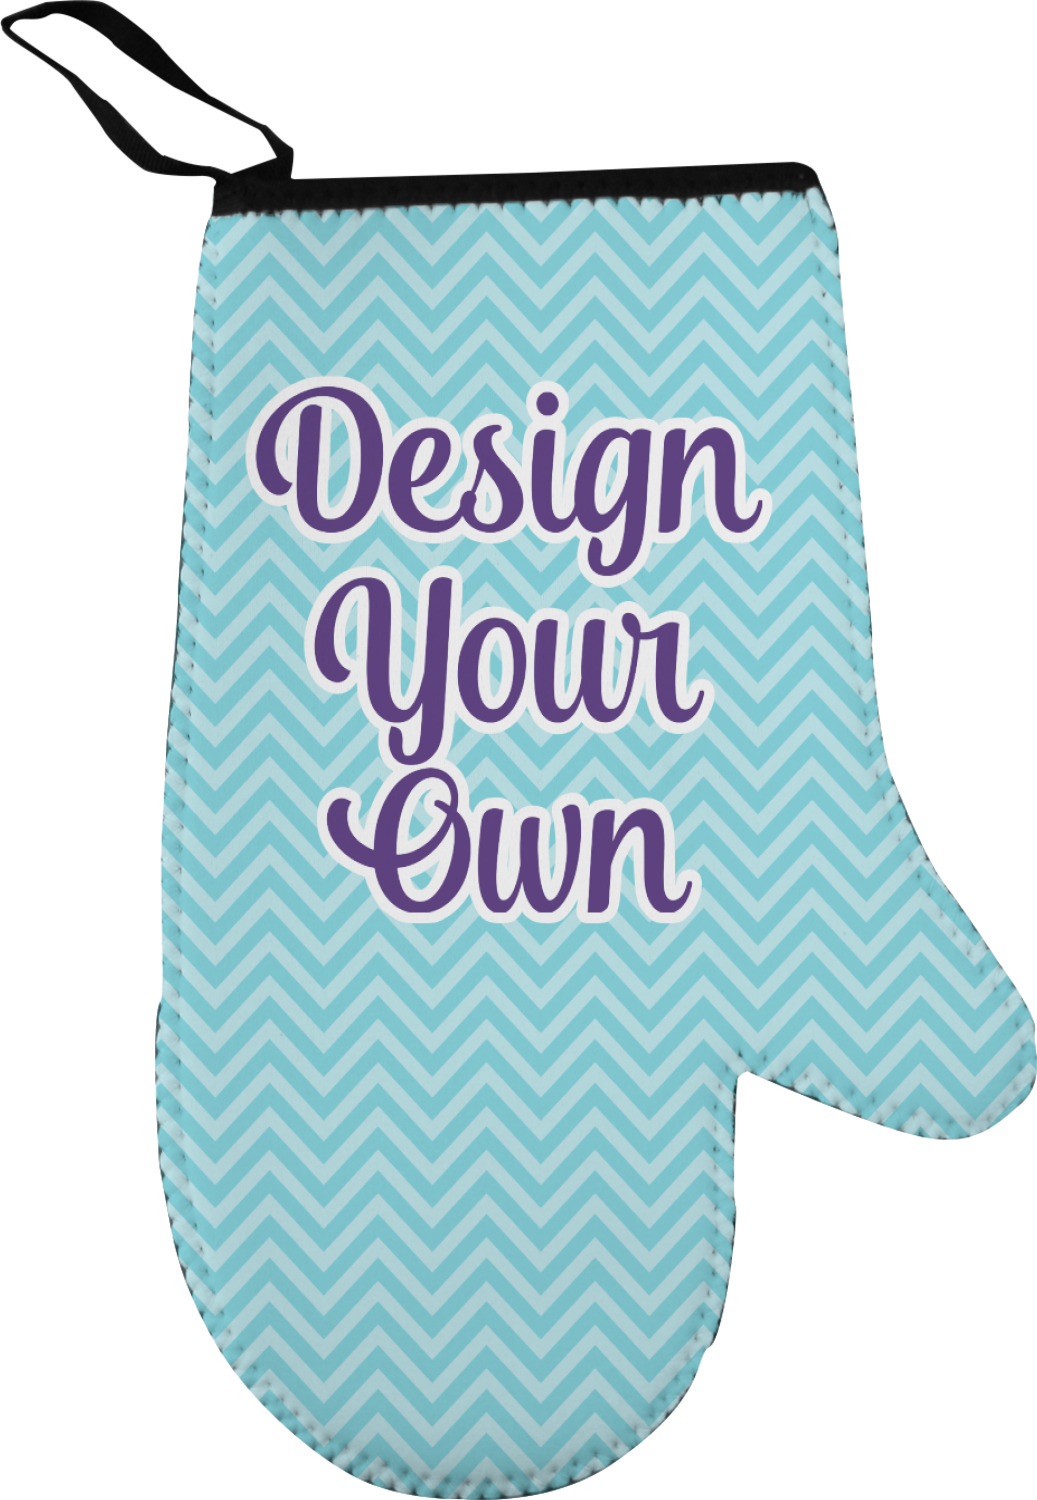 Custom Kitchen towel with oven mitts and glove – Martinez Crafts LLC